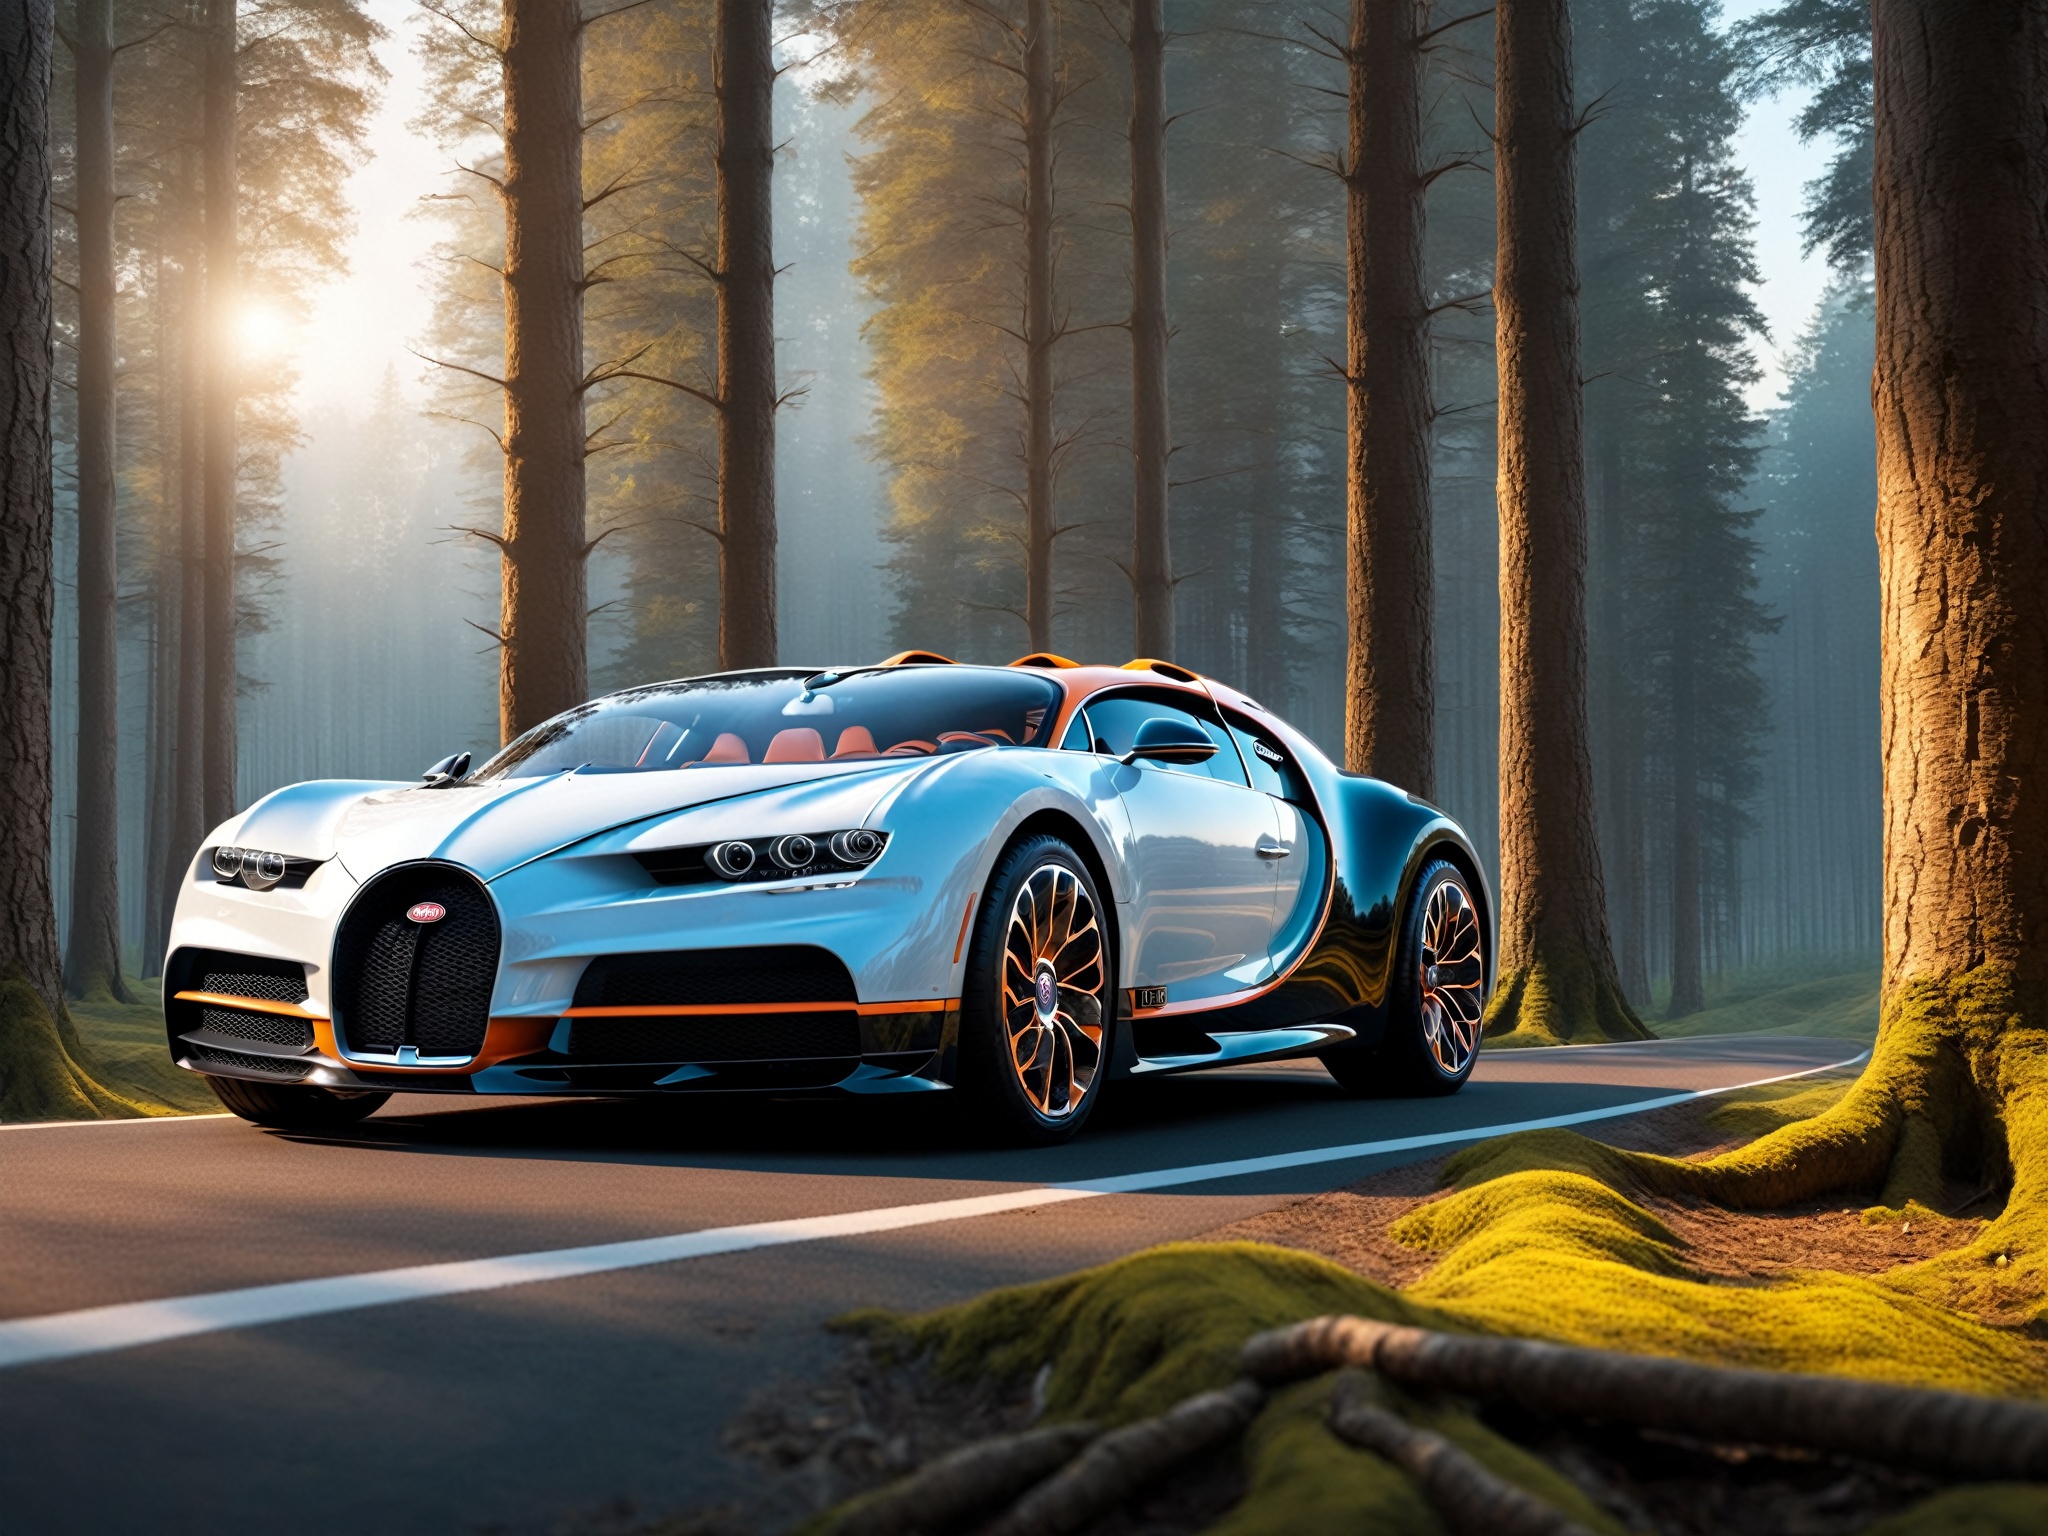  lifelike, precise, vibrant, absurdres,((bugatti concept car)) in Wonderland landscape,magical forest,the sign with text "CGArt" on it,(dreamlike elements:1.1),BREAK,vivid colorful sky with clouds, light up the surroundings,cinematic lighting, light master